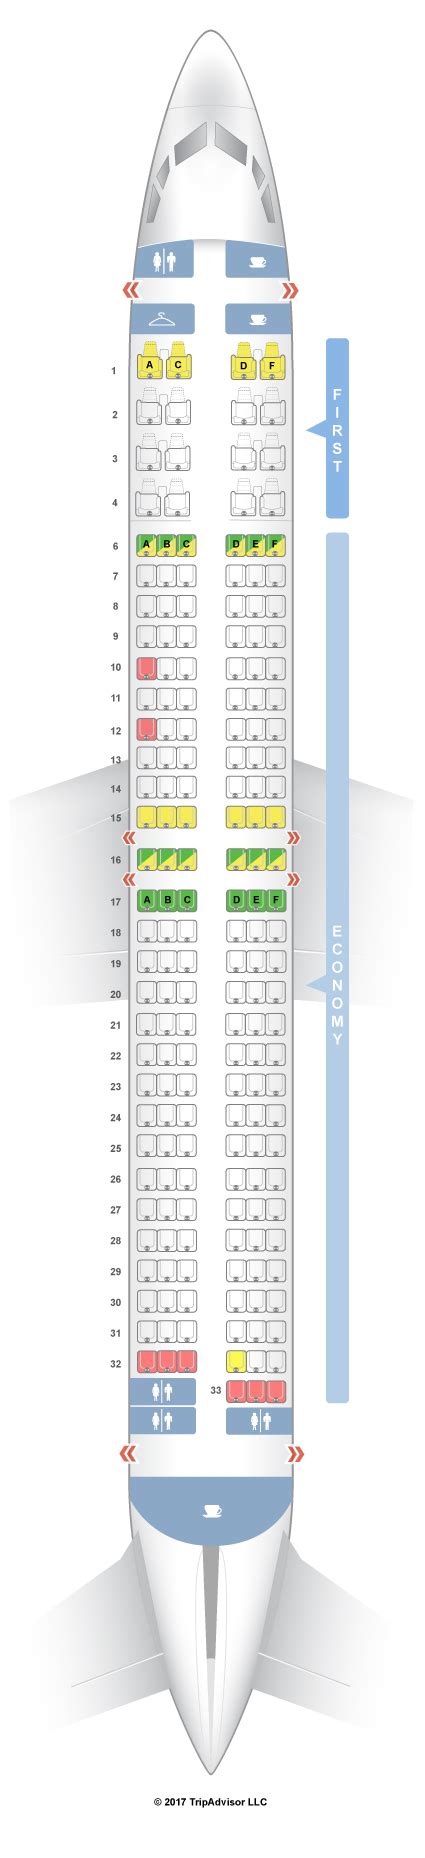 737 900 alaska seat map. The Boeing 737-900 is the largest plane in Alaska's fleet, with the rest being various smaller models of the Boeing 737 family. Note that Alaska flies two slightly different versions of the Boeing 737-900 and they are basically interchangeable with each other with the exception of the exit rows. 